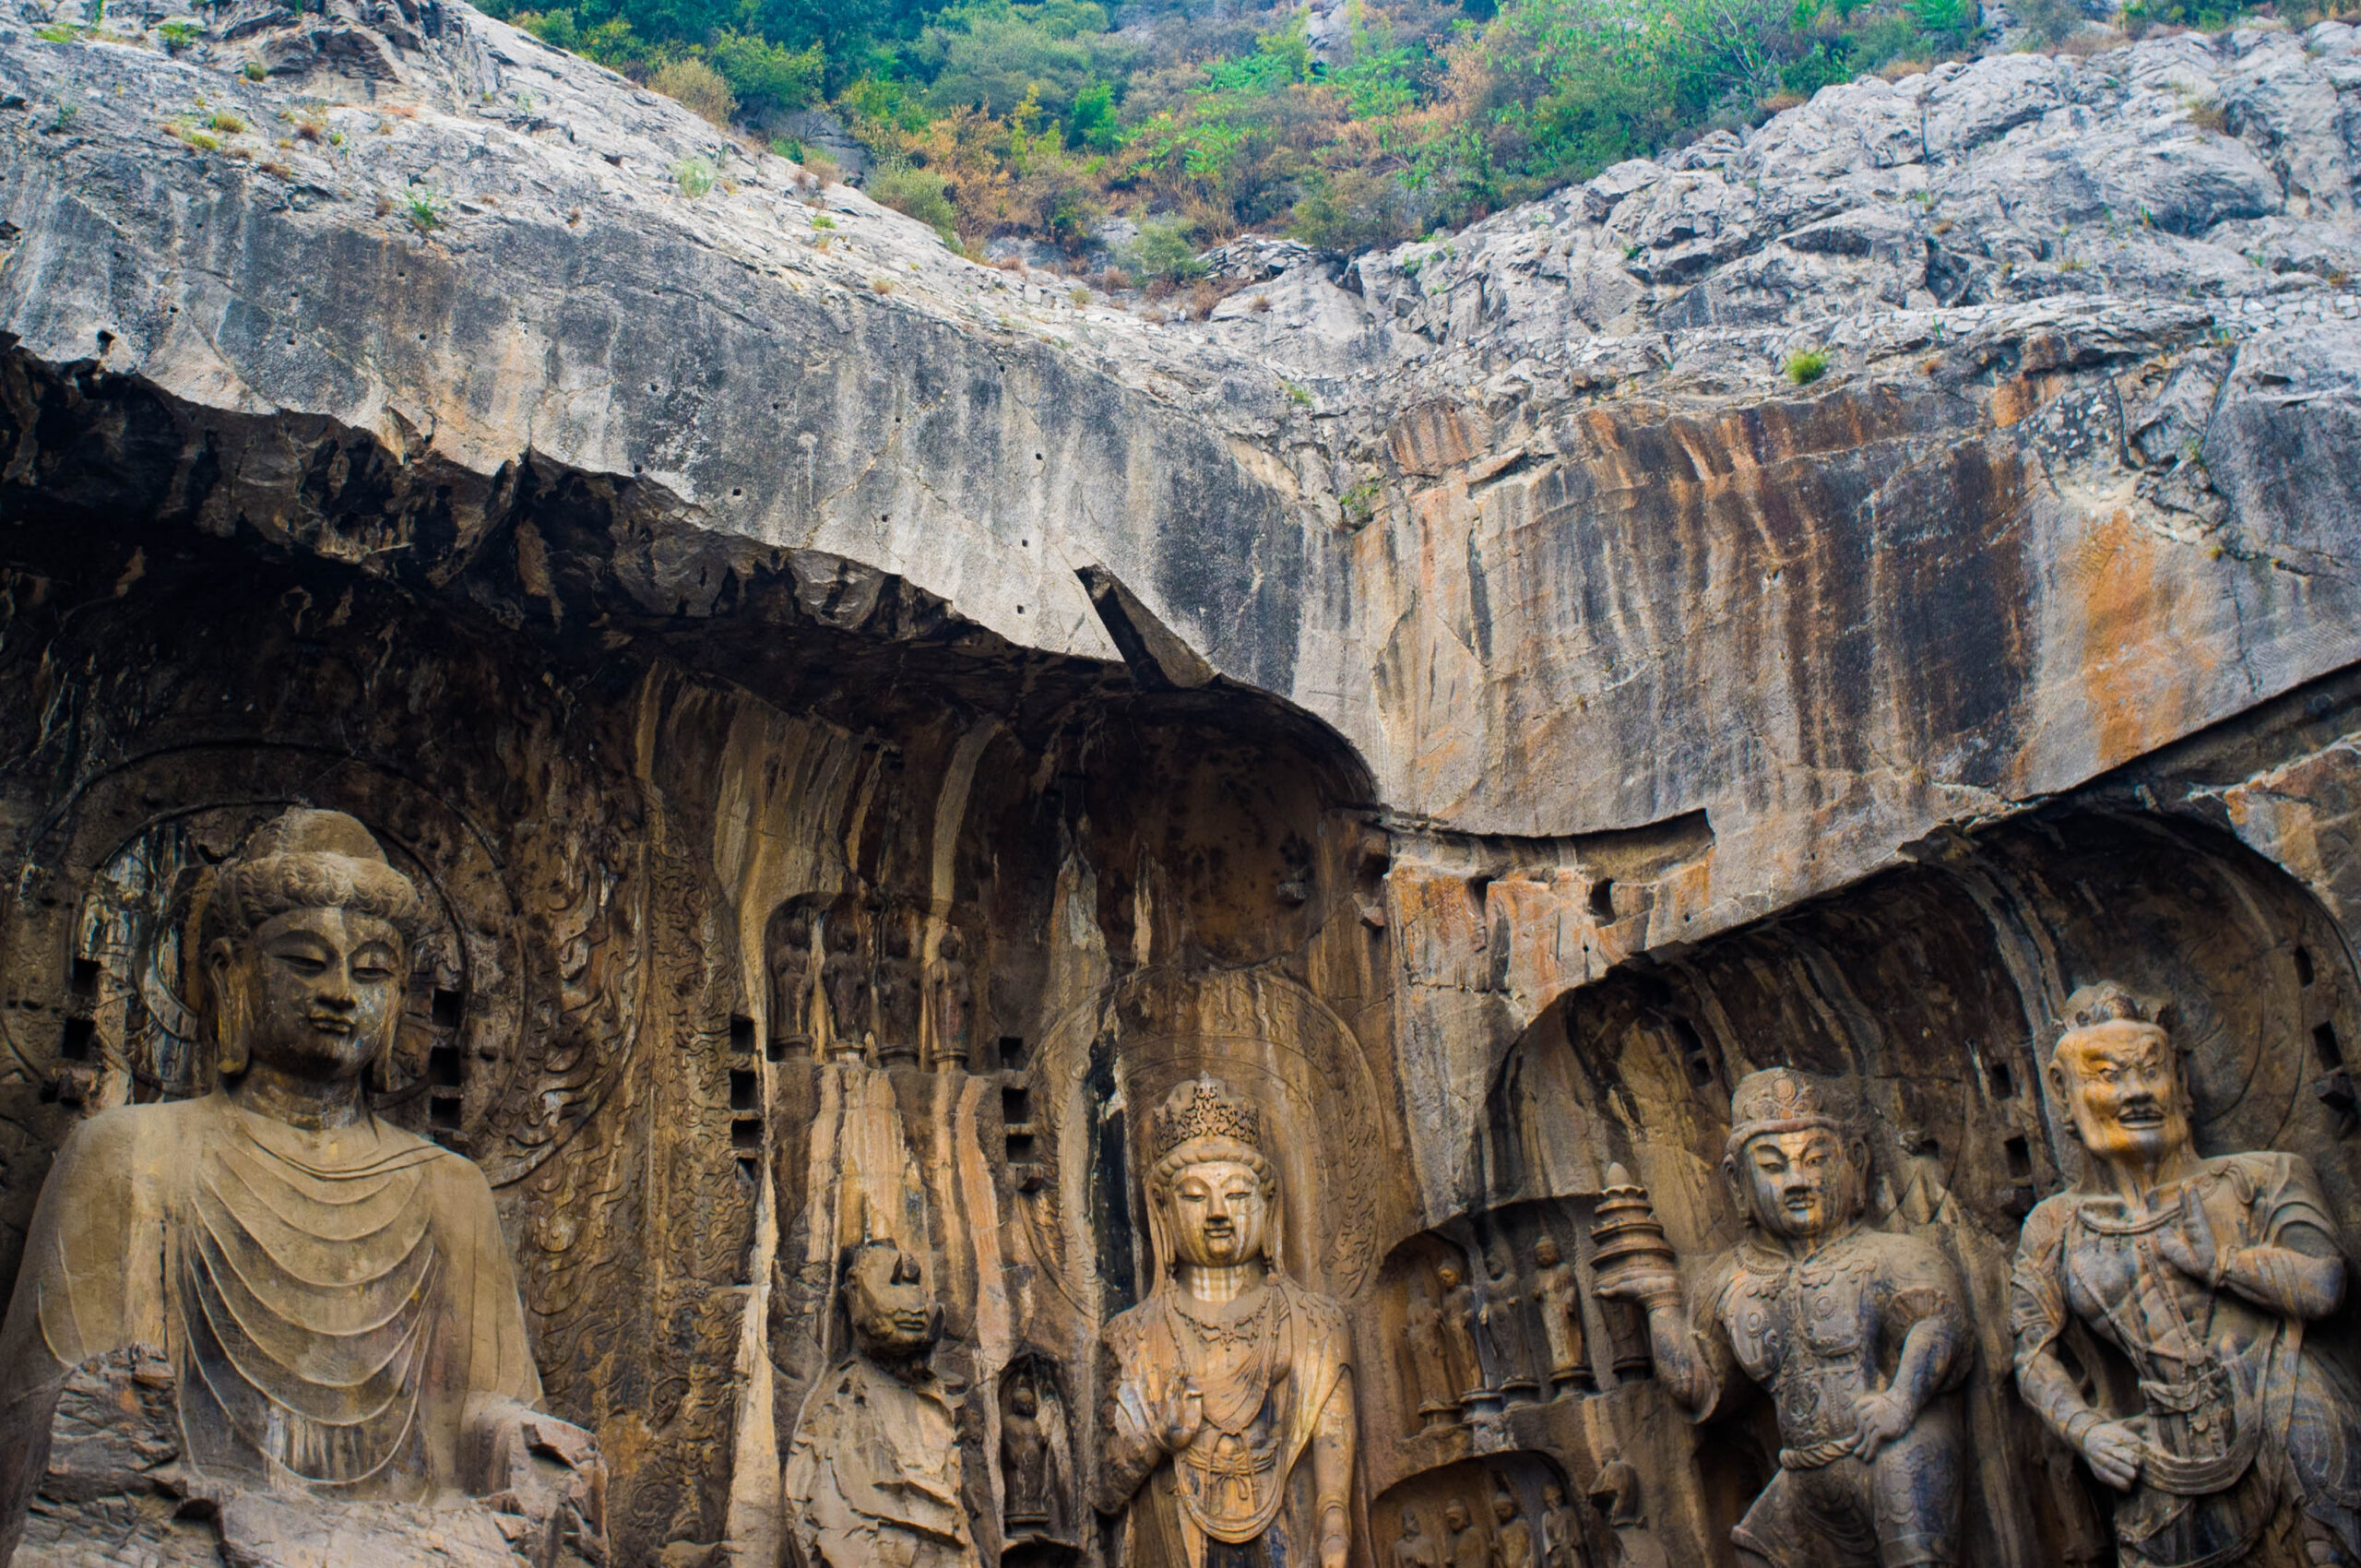 The Longmen Grottoes: A Masterpiece of Buddhist Art Carved in Stone